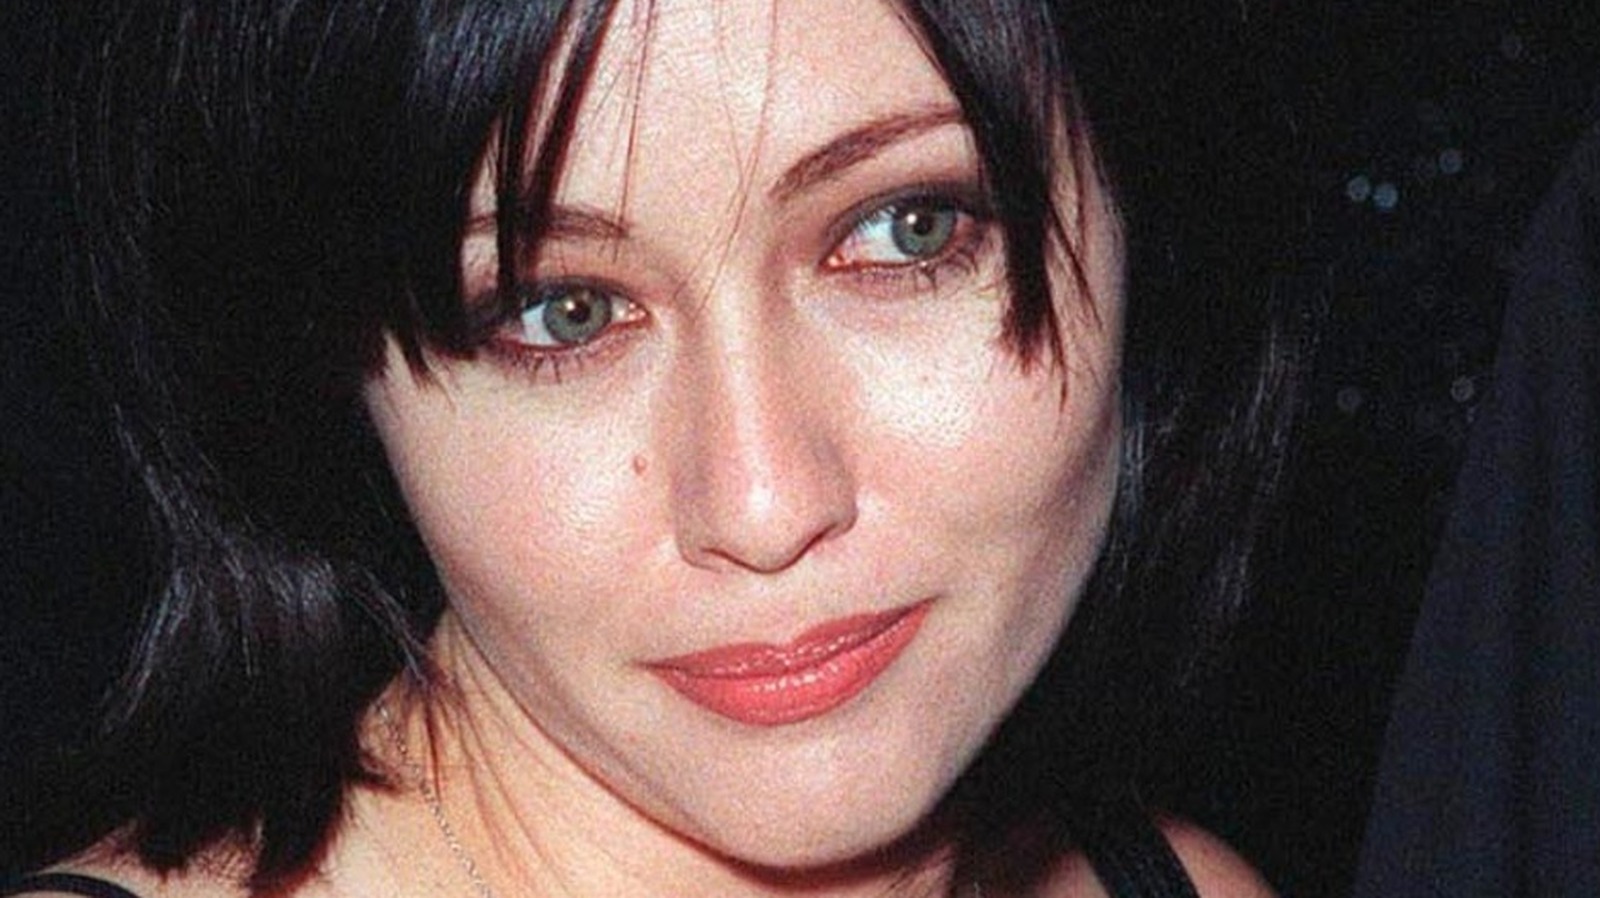 Shannon doherty hot